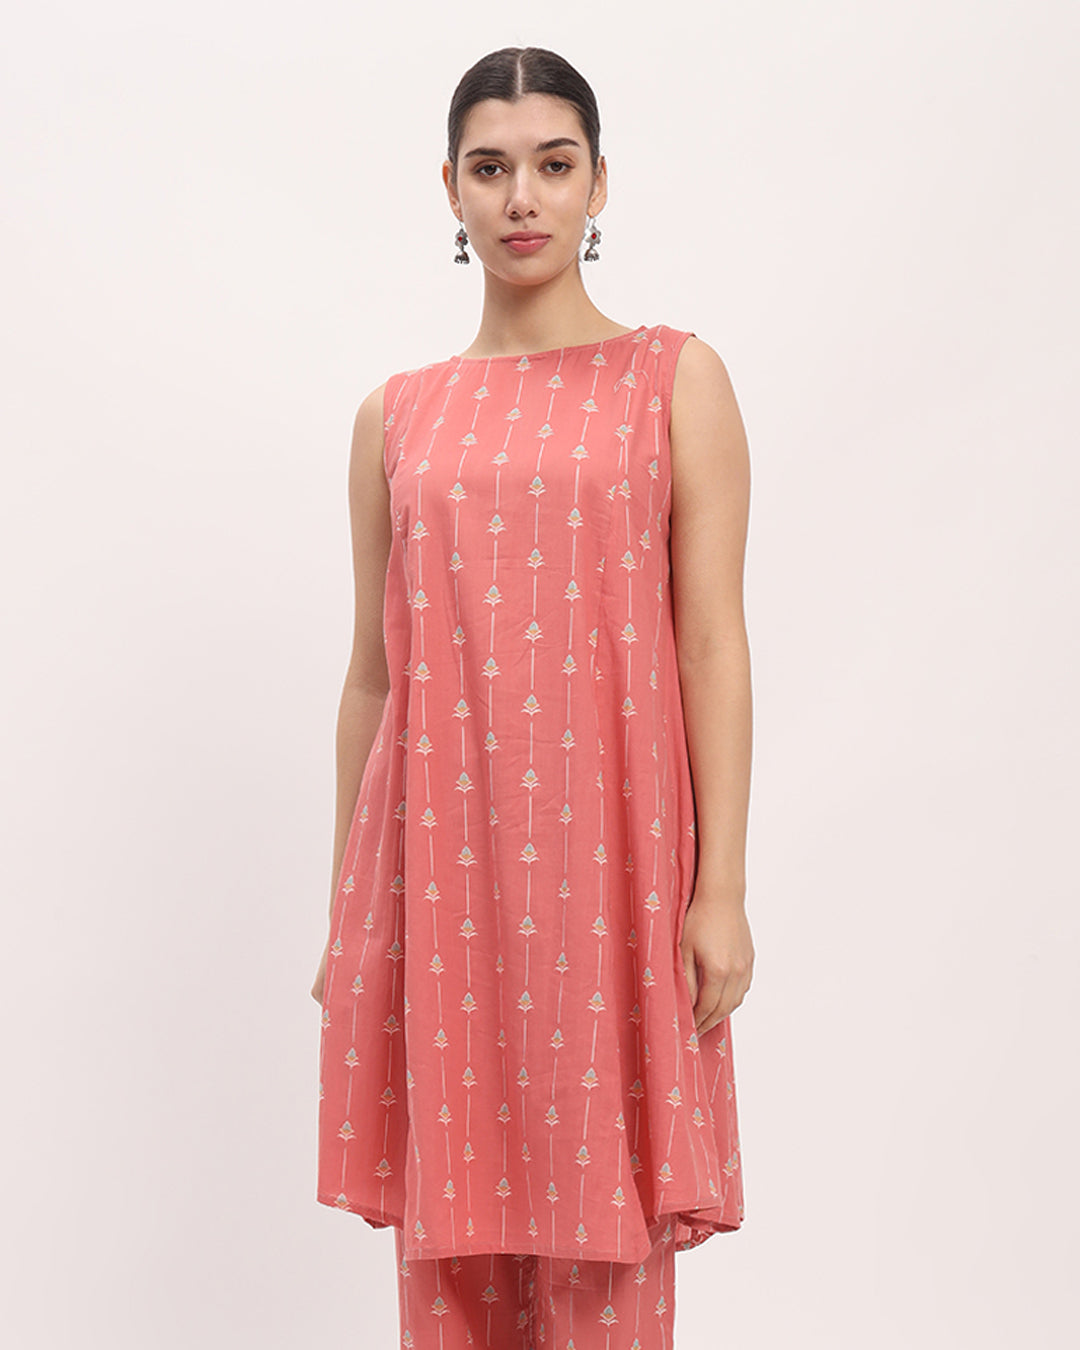 English Floral Tracks Sleeveless A-Line Printed Kurta (Without Bottoms)